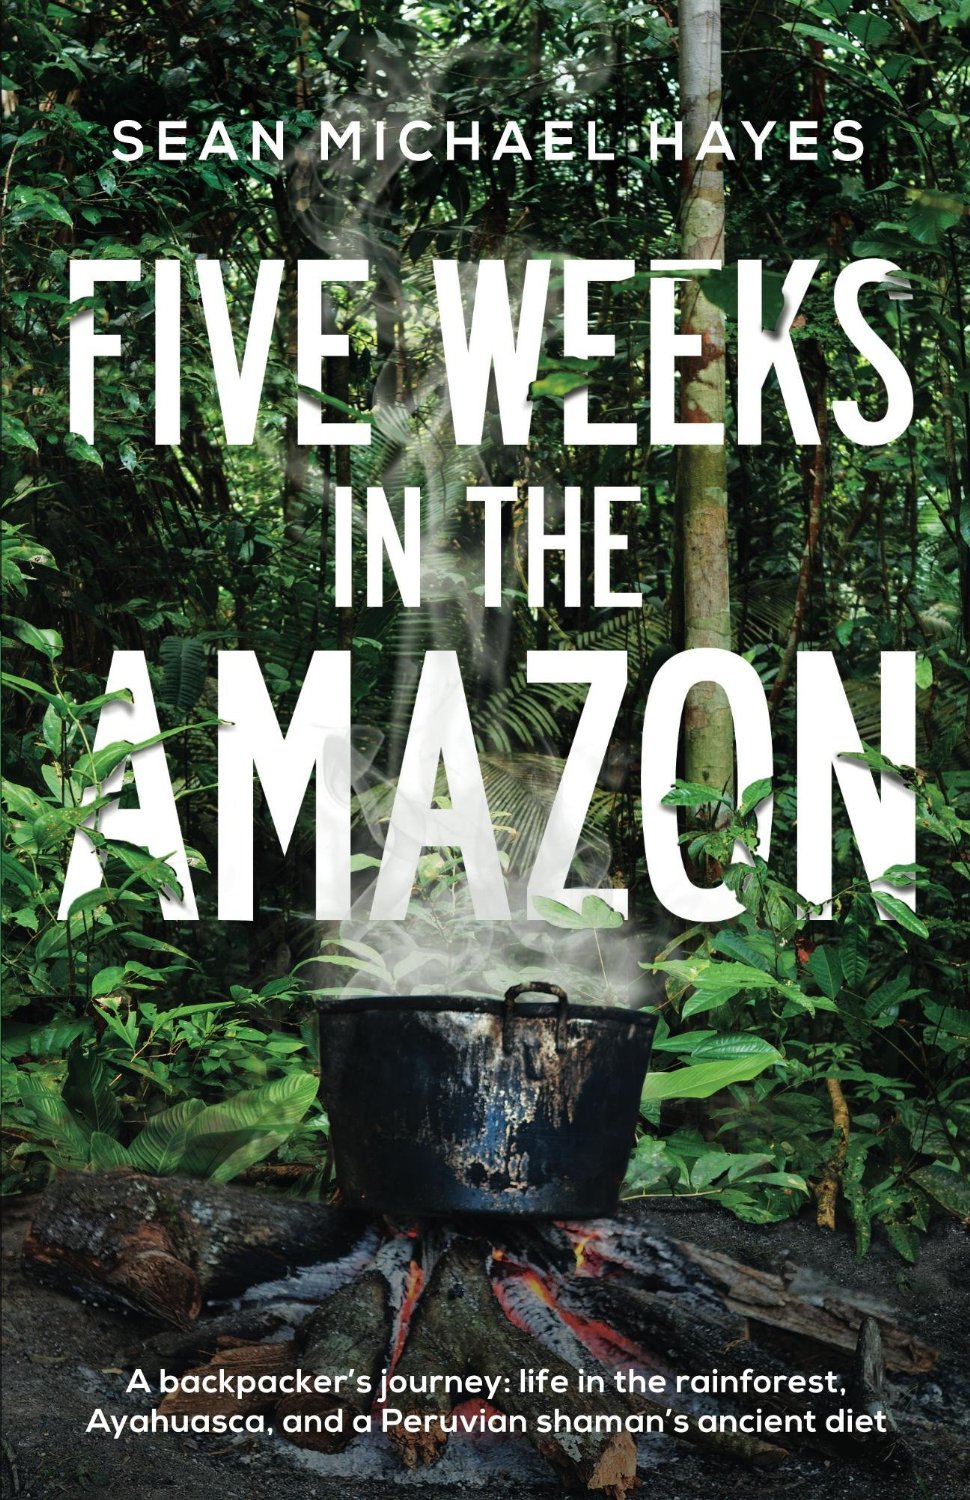 Five Weeks in the Amazon: A backpacker’s journey: life in the rainforest, Ayahuasca, and a Peruvian shaman’s ancient diet by Sean Michael Hayes